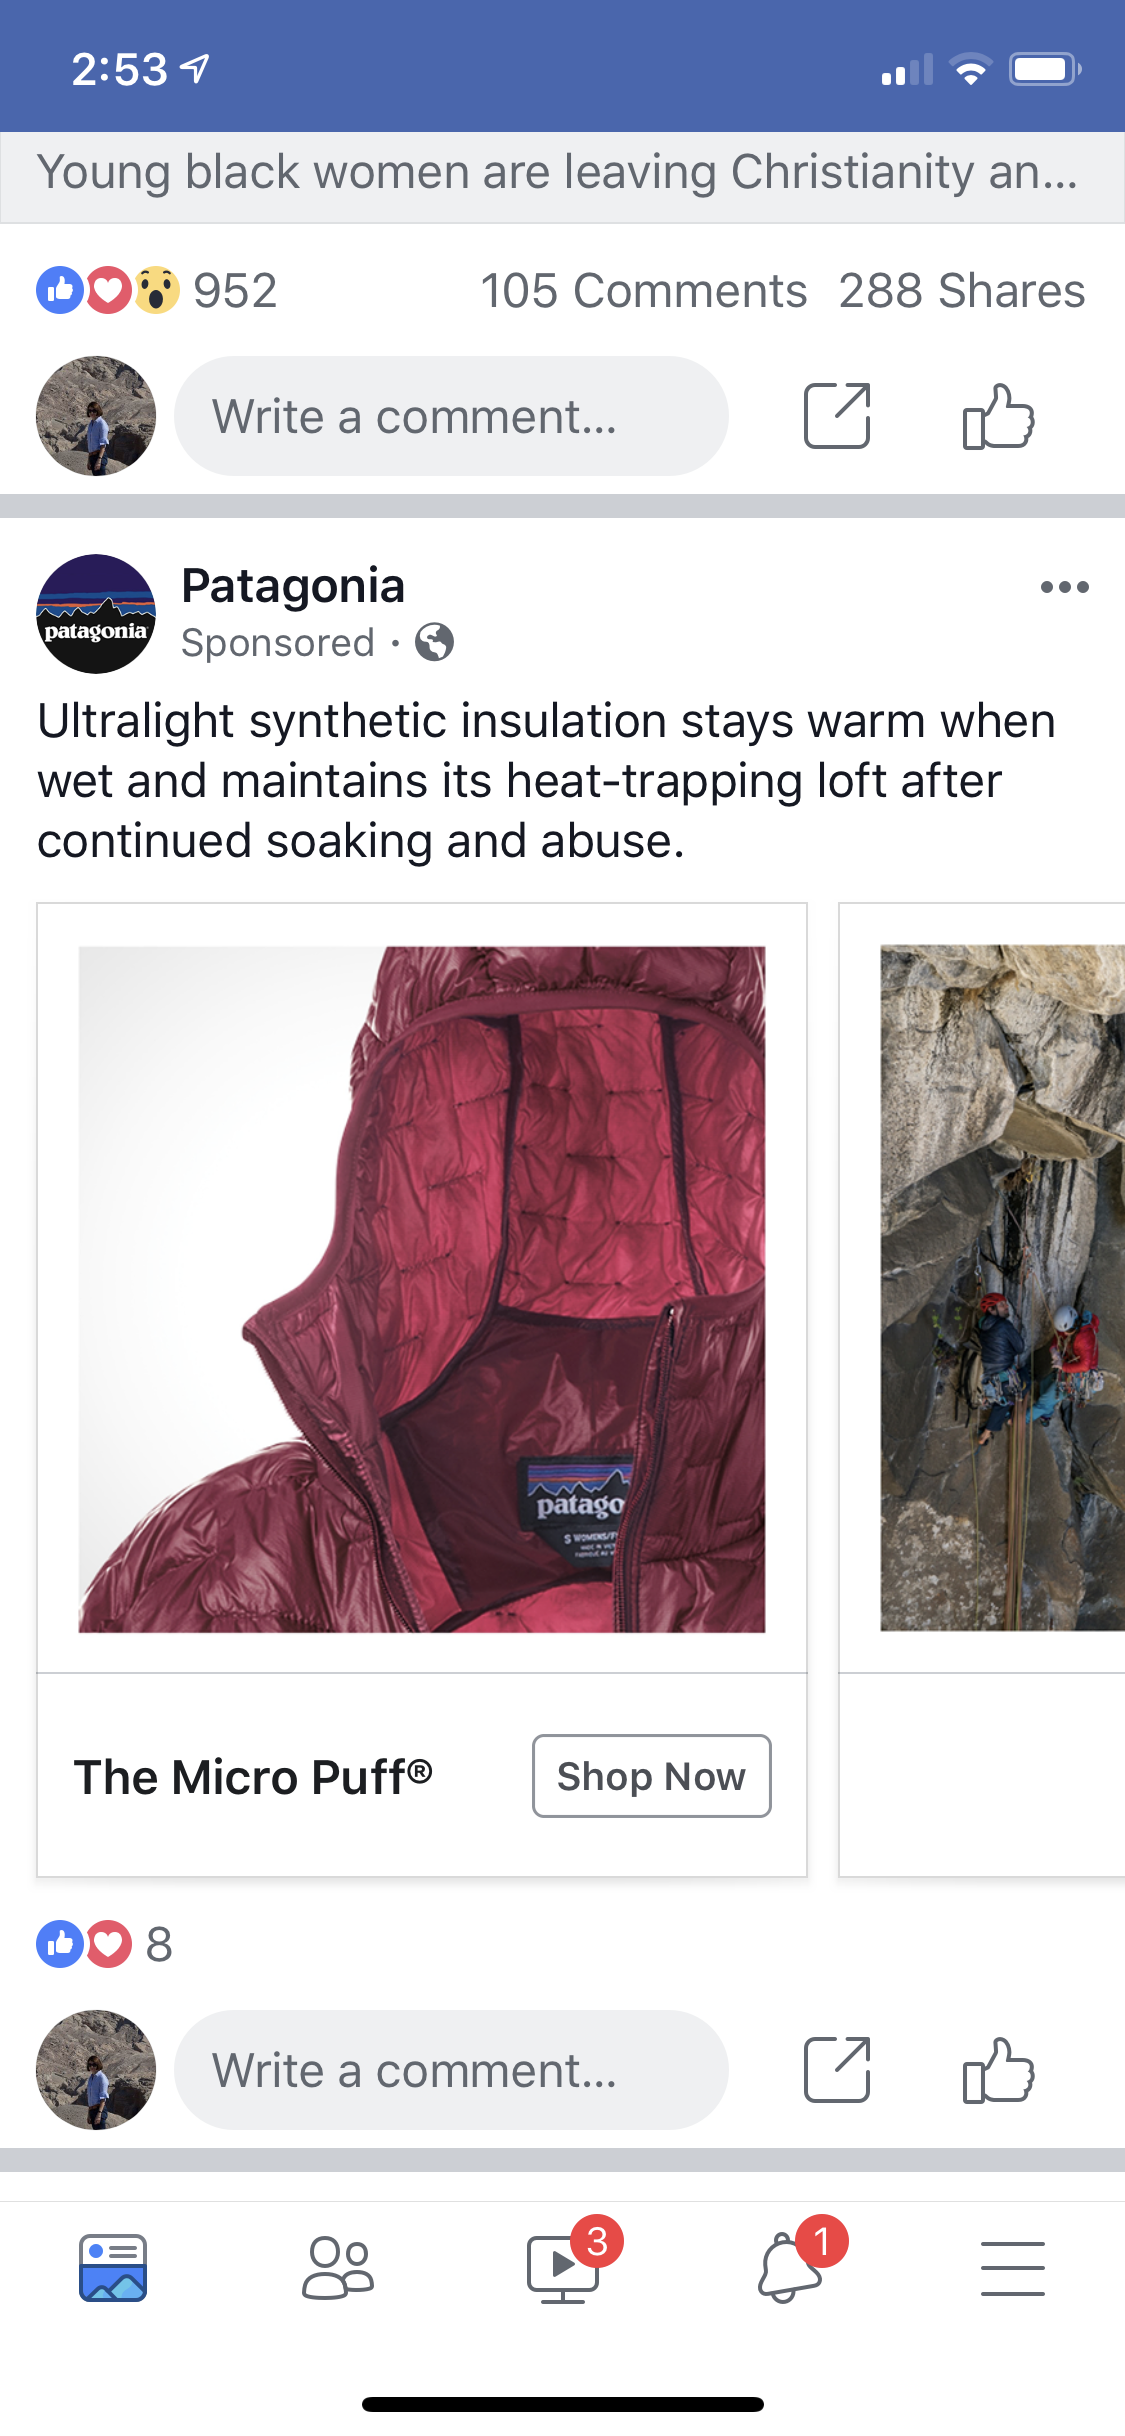 A Patagonia ad on Facebook